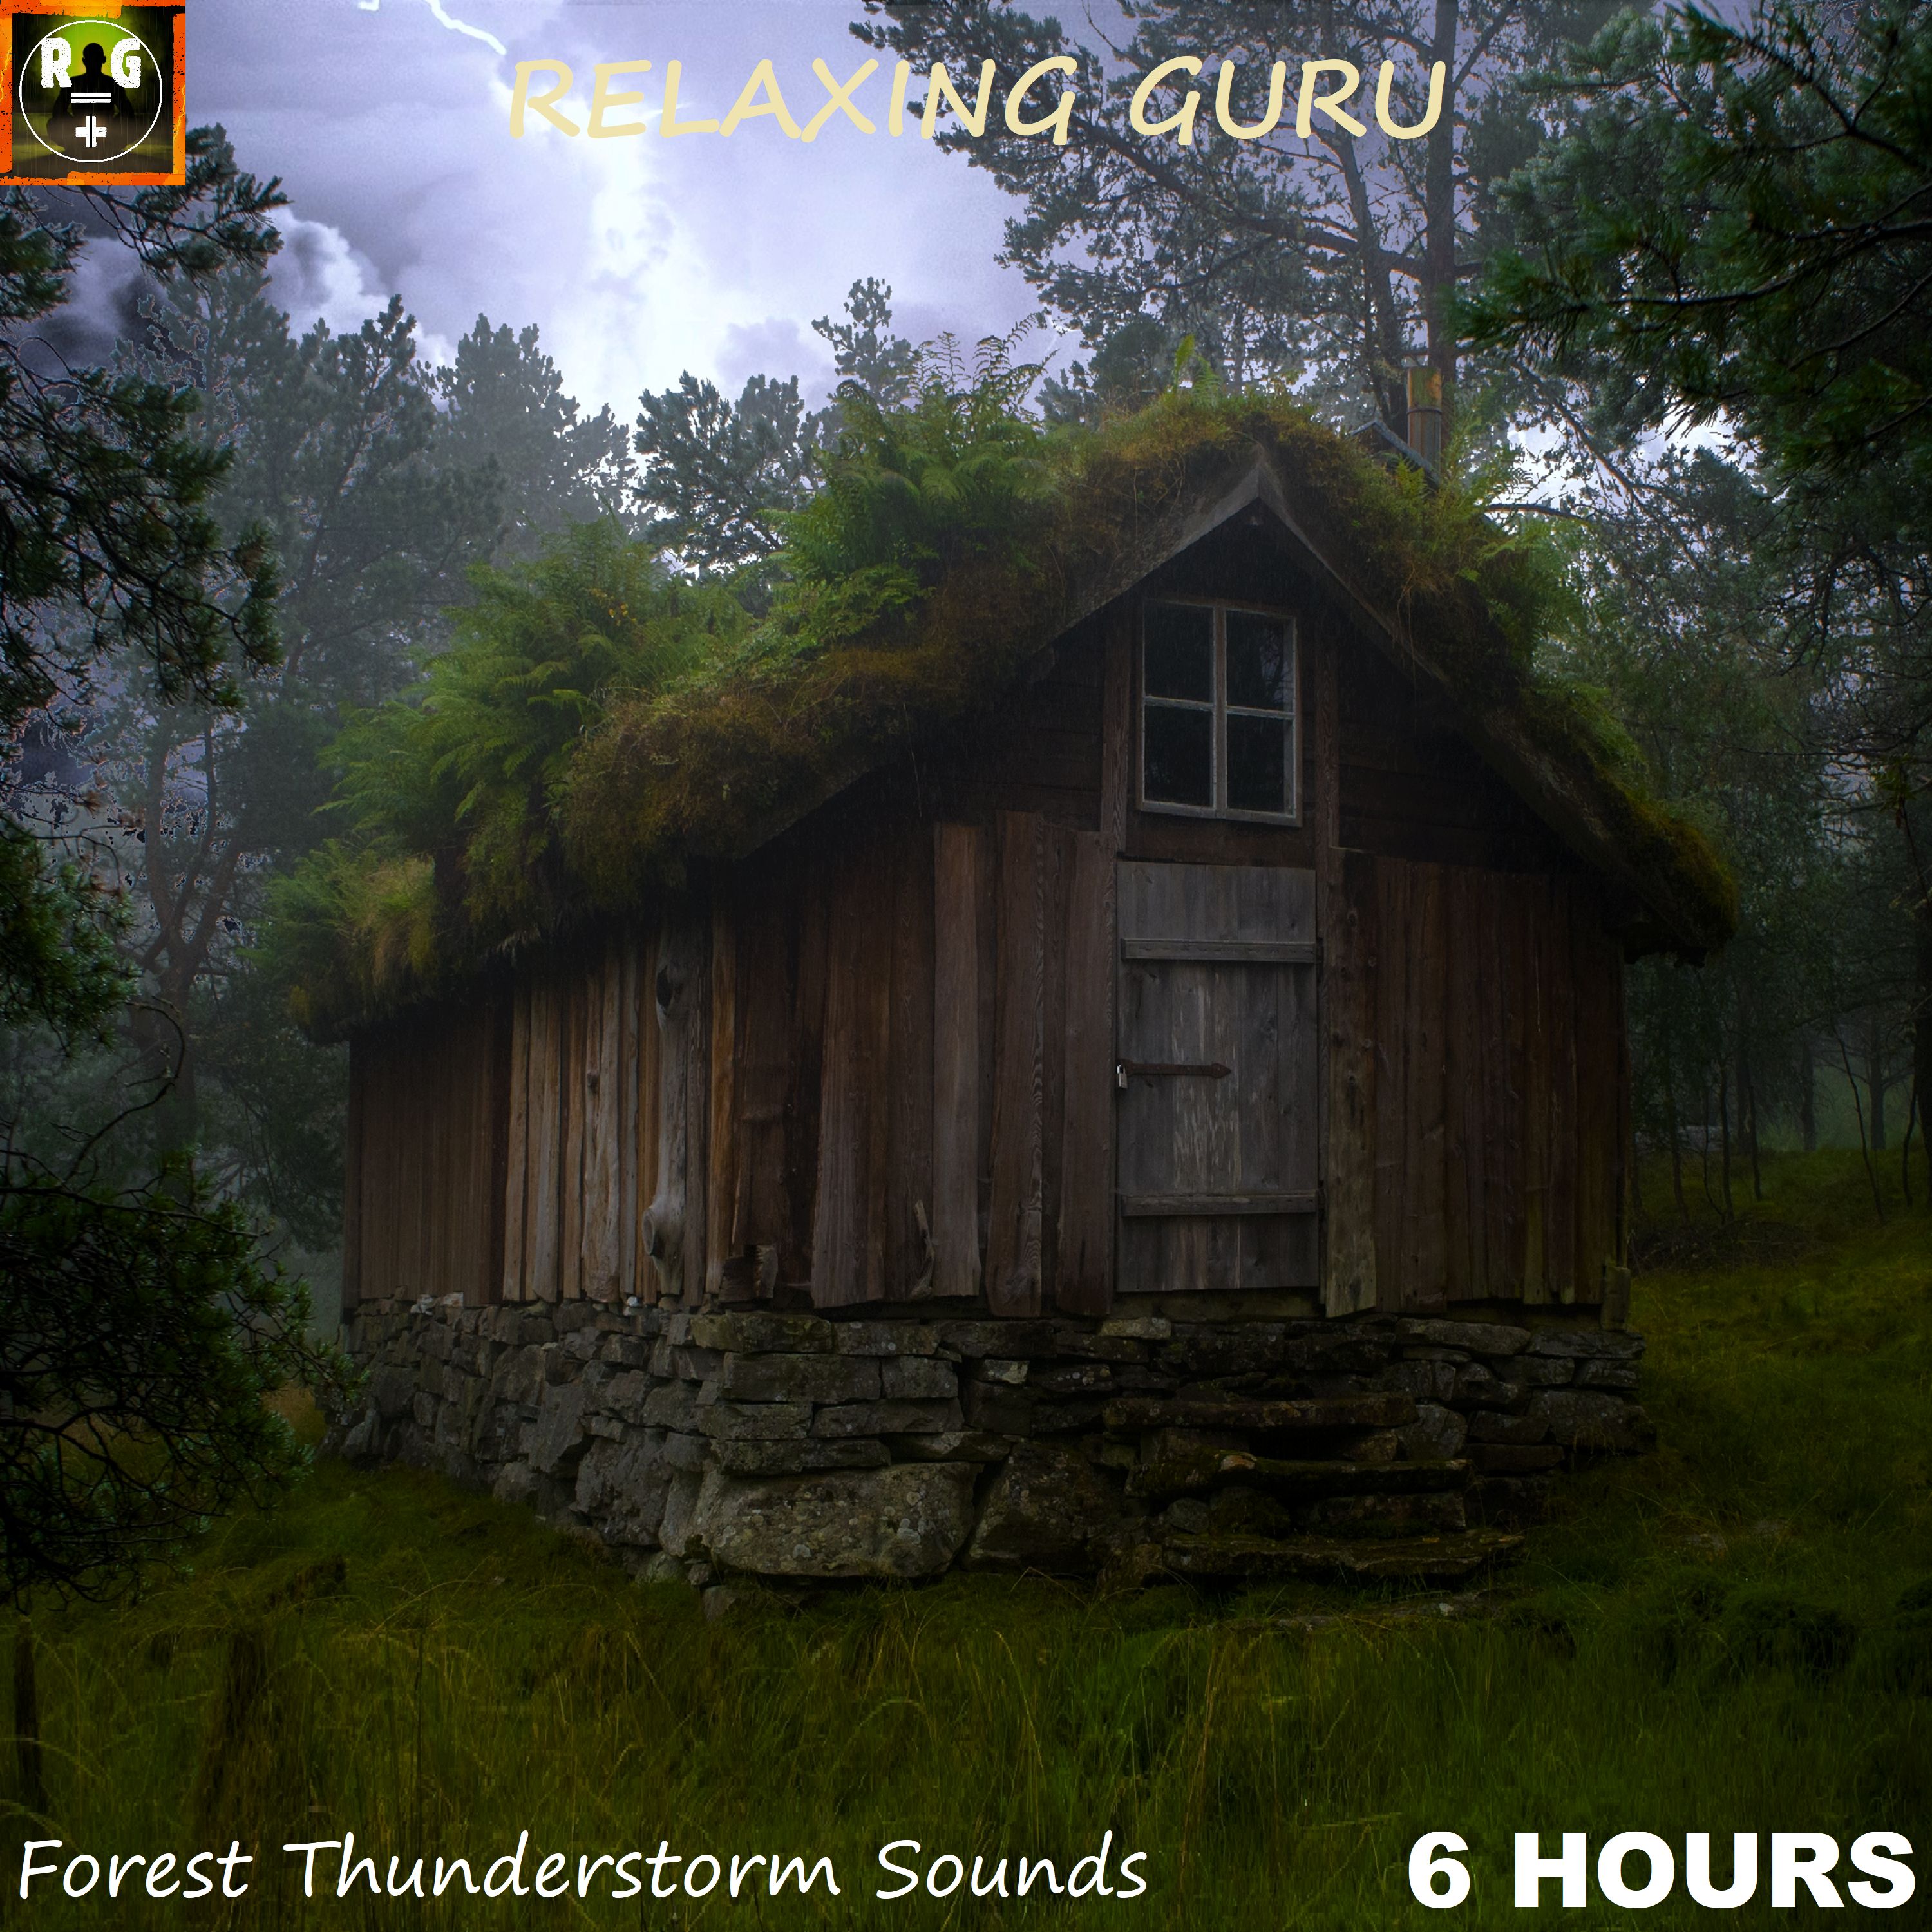 डाउनलोड करा Relaxing Rain & Thunder on a Wooden Hut deep in the Forest - Thunderstorm Sounds for Sleep (6 HOURS)